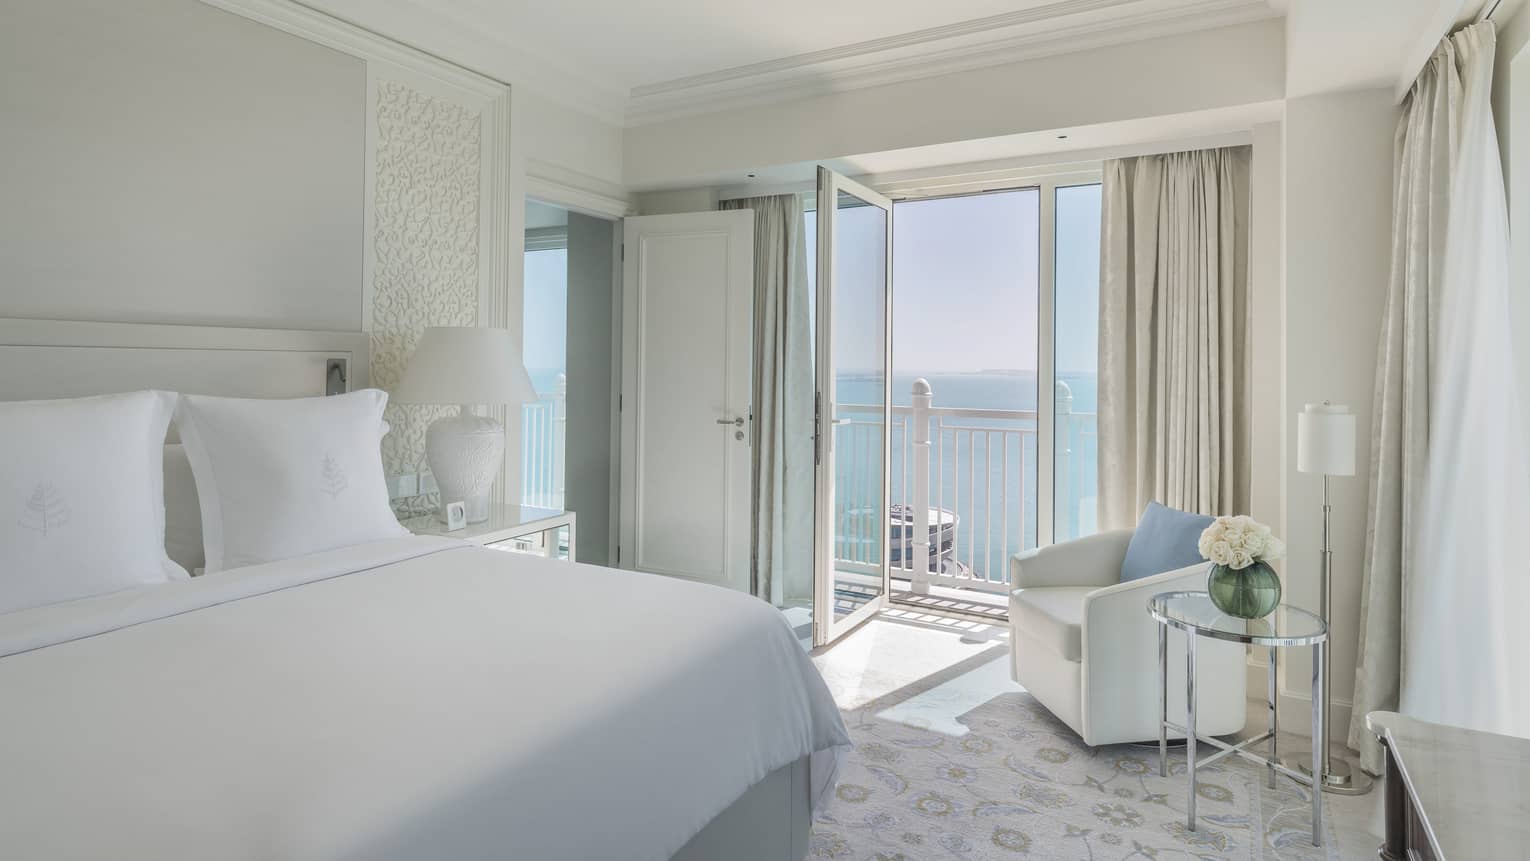 A suite with a large white bed, and an open balcony overlooking the sea.